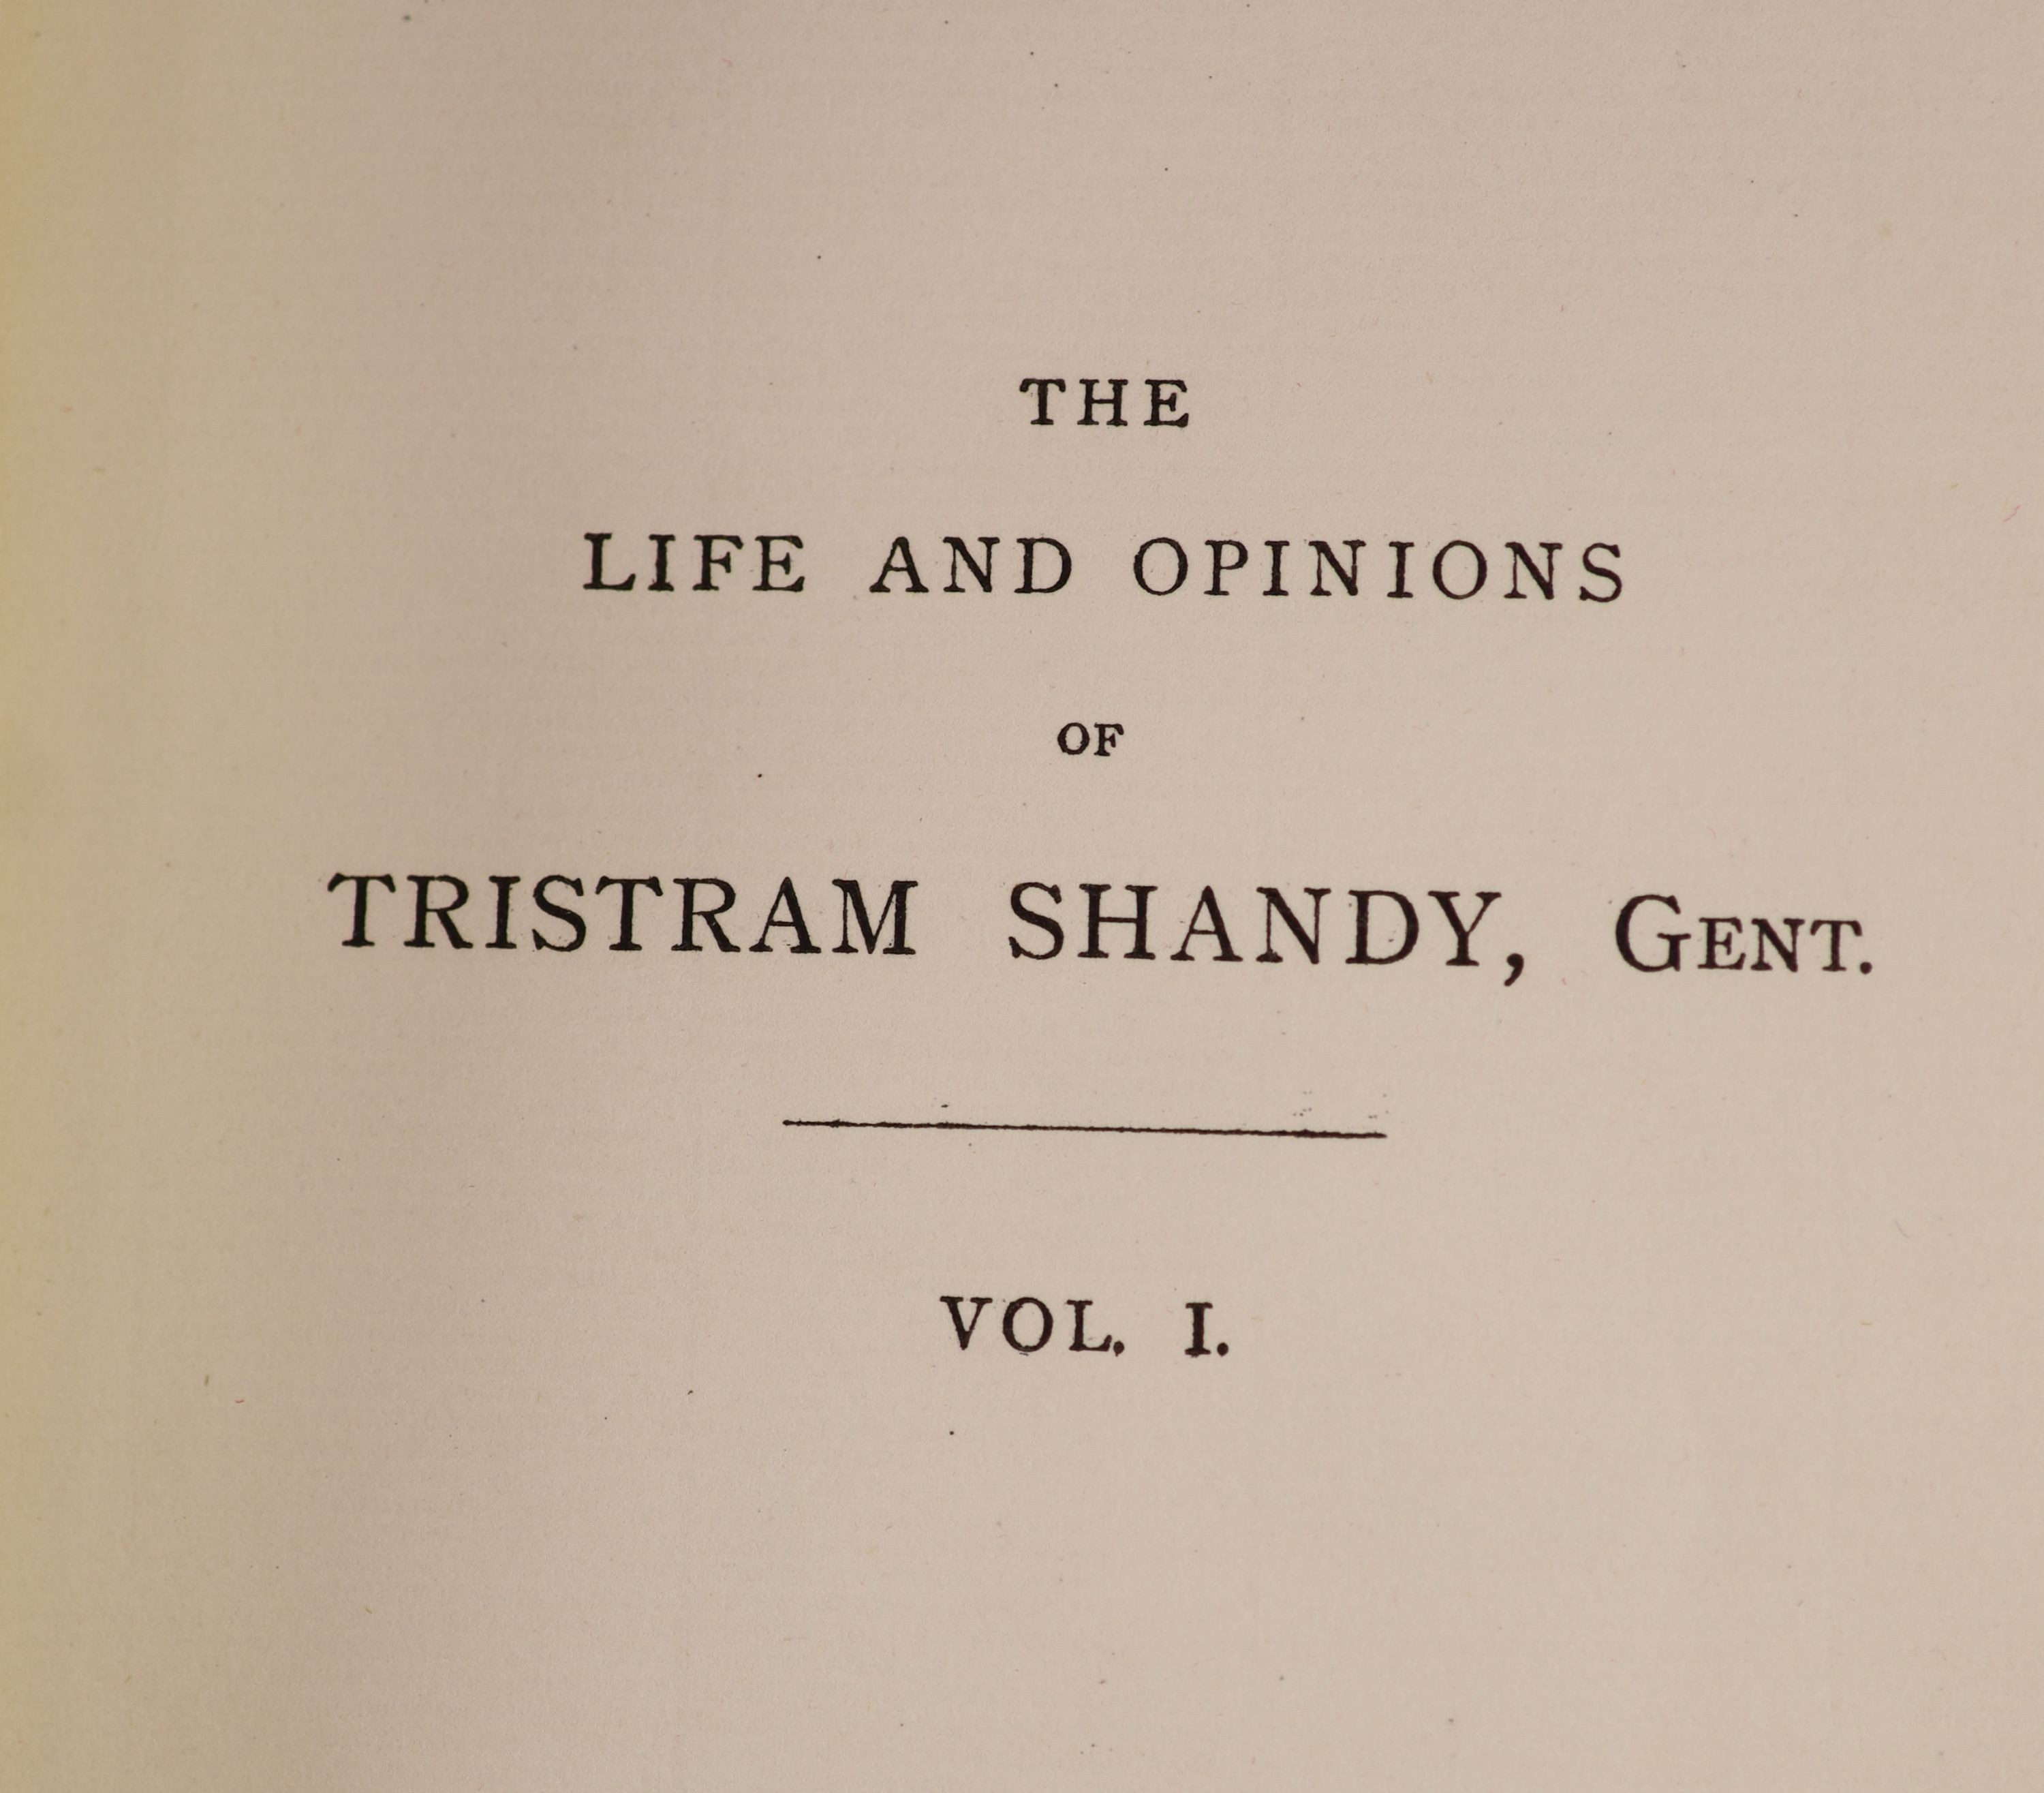 Sterne, Laurence - The Life and Opinions of Tristram Shandy gentleman. Limited Edition, 2 vols. 16 etched plates, half titles; rebound mid 20th century green gilt-ruled morocco with